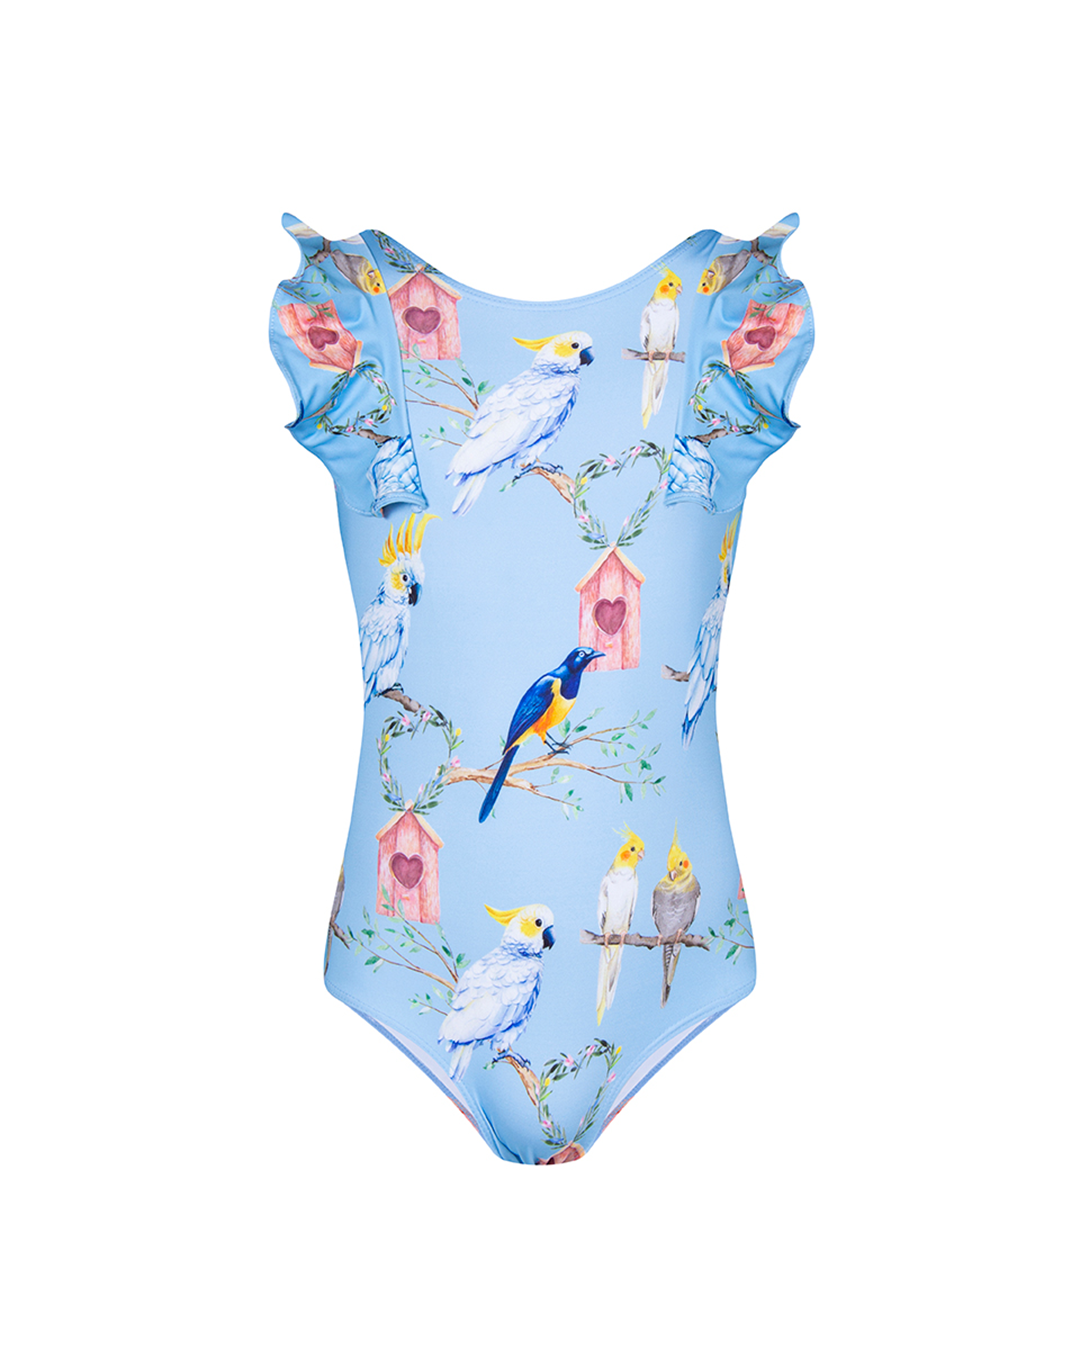 COCKATOO IN BLUE ONE-PIECE SWIMSUIT